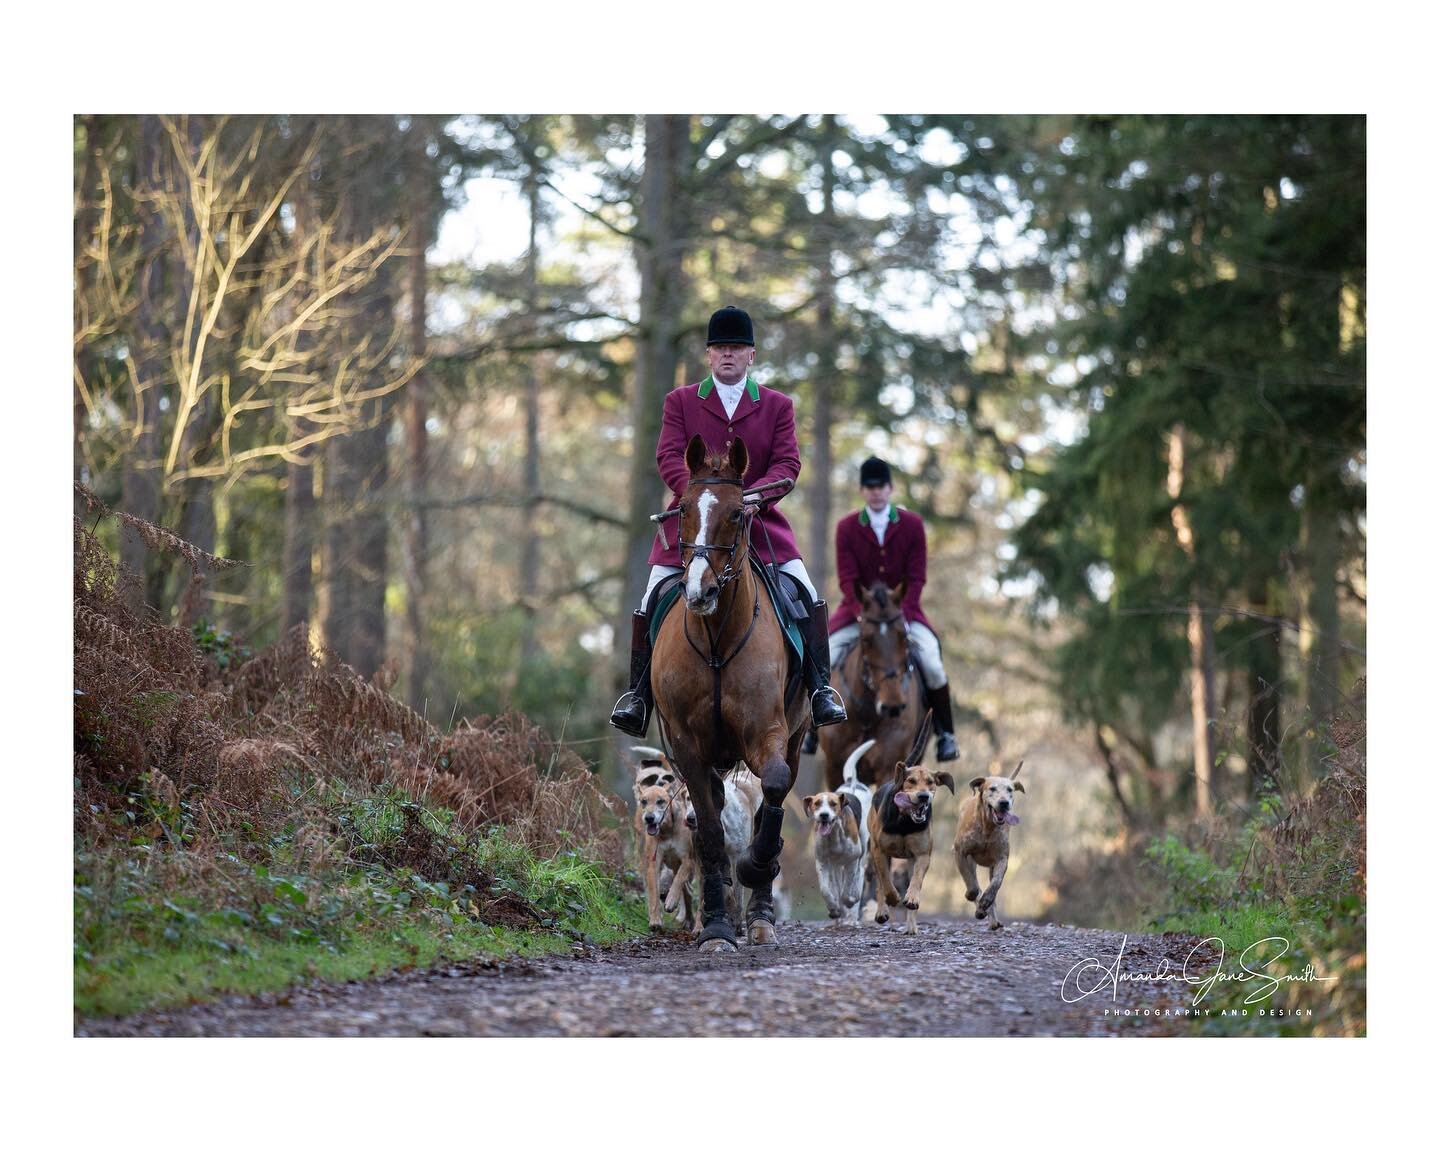 A really lovely day out with the @staffcollegedraghunt at Tweseldown. Here are a few of my images.  More can be seen via the link in my bio. (Under client galleries in the menu).

#horses #hunting #draghunting #cleanboothunting #hounds #equestrian #c